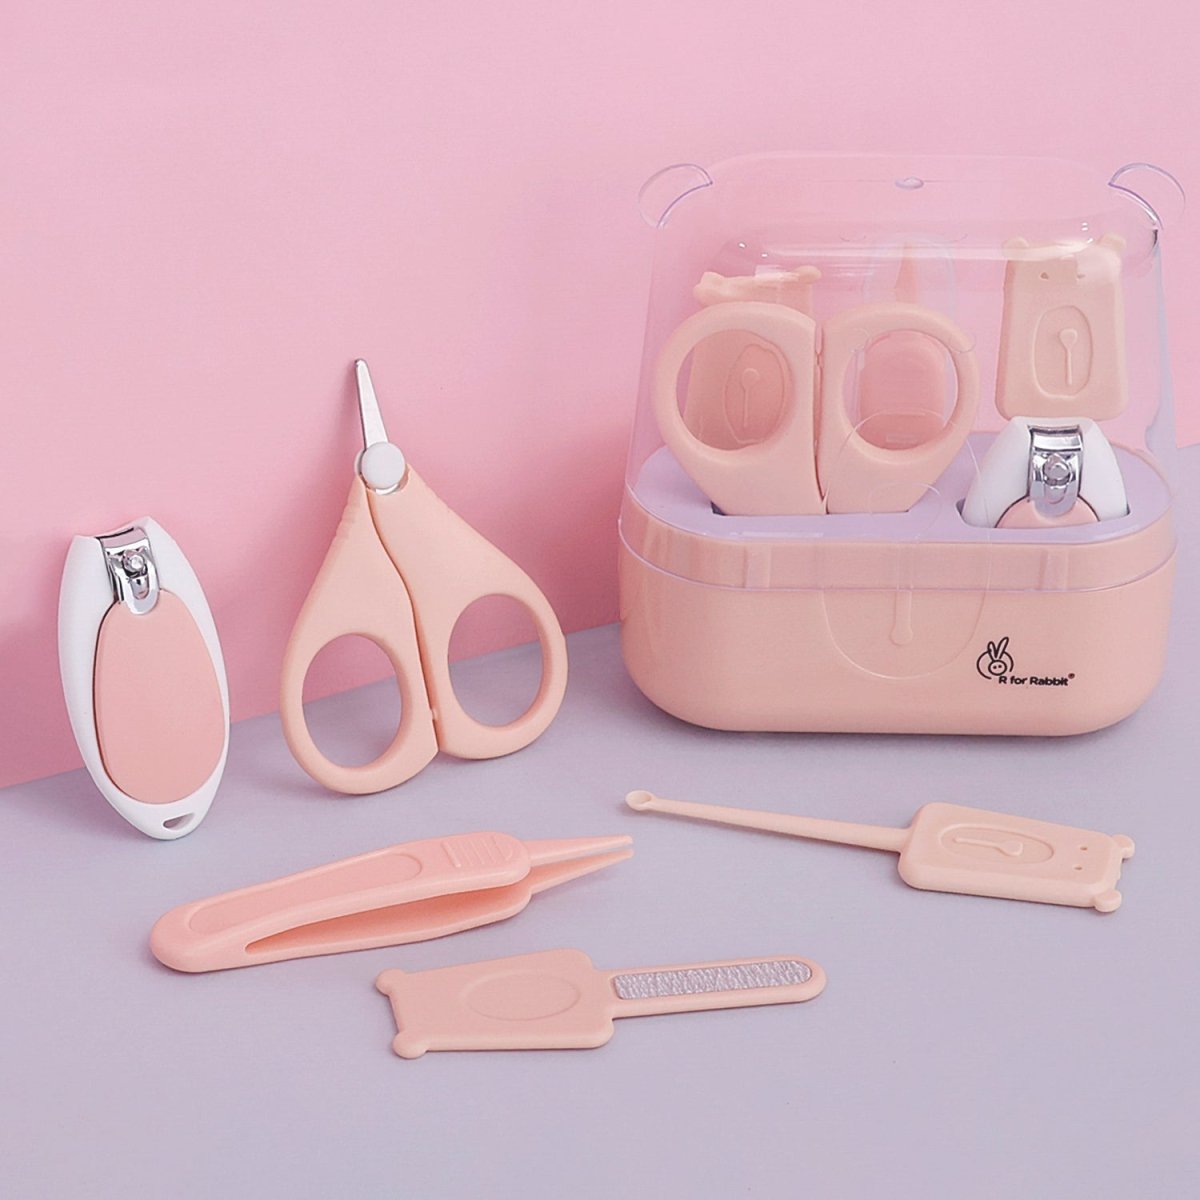 R for Rabbit Stylo Teddy Baby Manicure Set- Pink - GRSTTP2